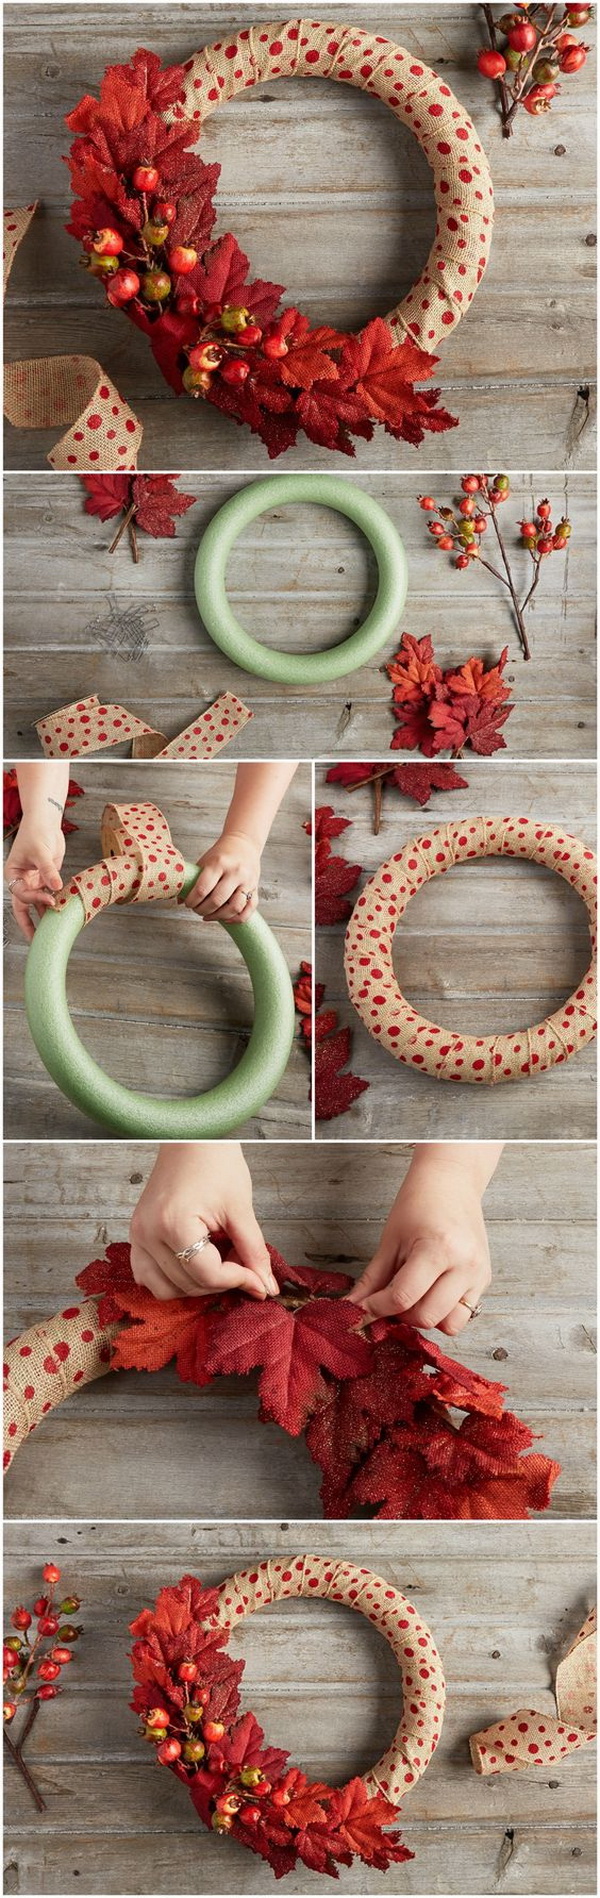 DIY Fall Wreath. Wreath are popular decorations for any season. It makes a nice addition to the décor. This simple wreath, made of flowers, vines and berries in autumn tones is great for a perfect fall look. 